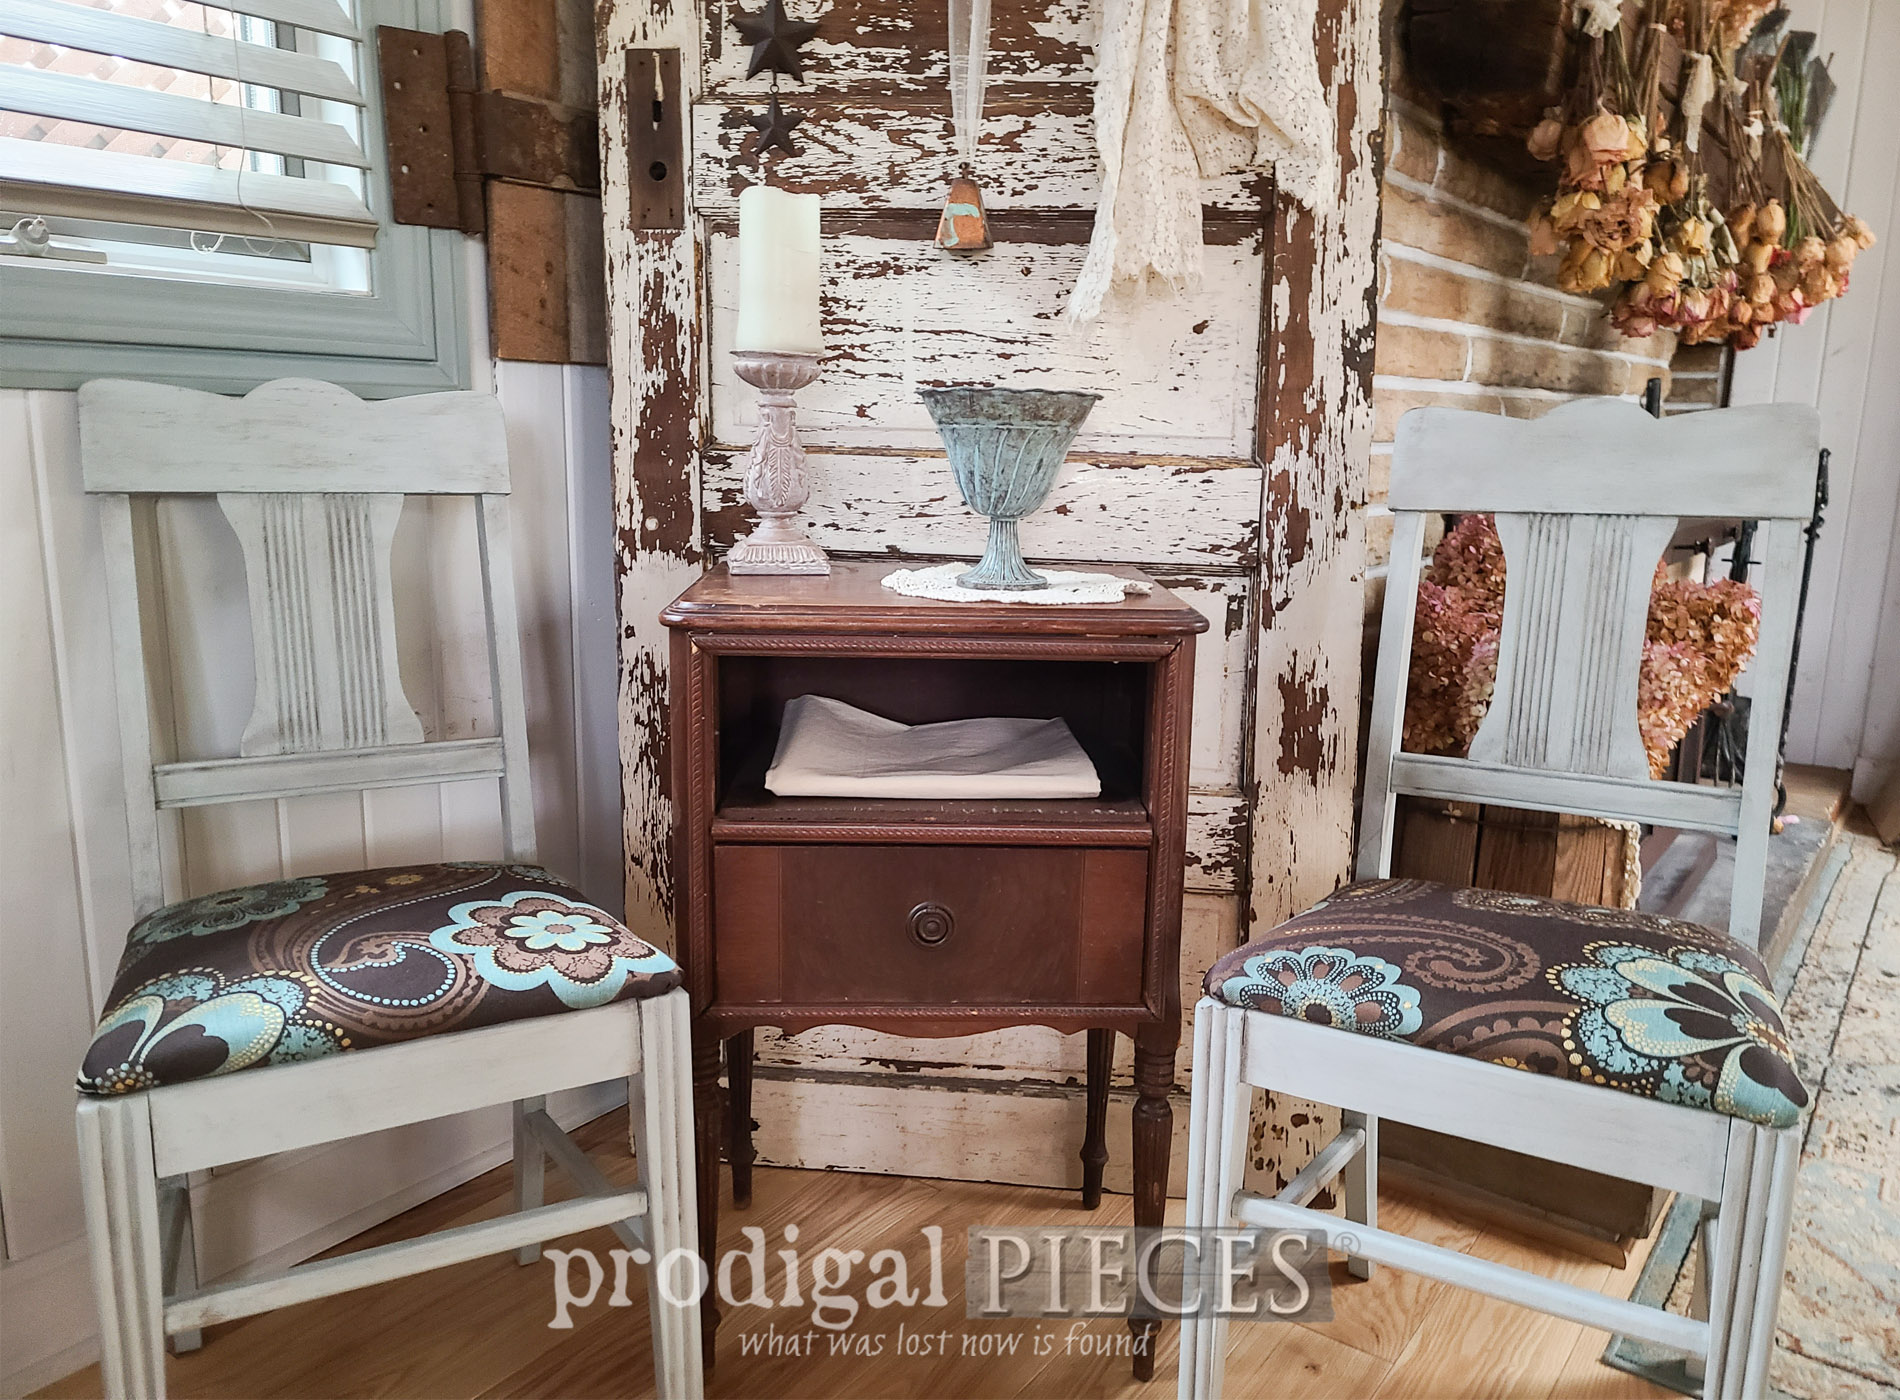 Featured Vintage Chairs Makeover by Larissa of Prodigal Pieces | prodigalpieces.com #prodigalpieces #chairs #vintage #diy #upholstery